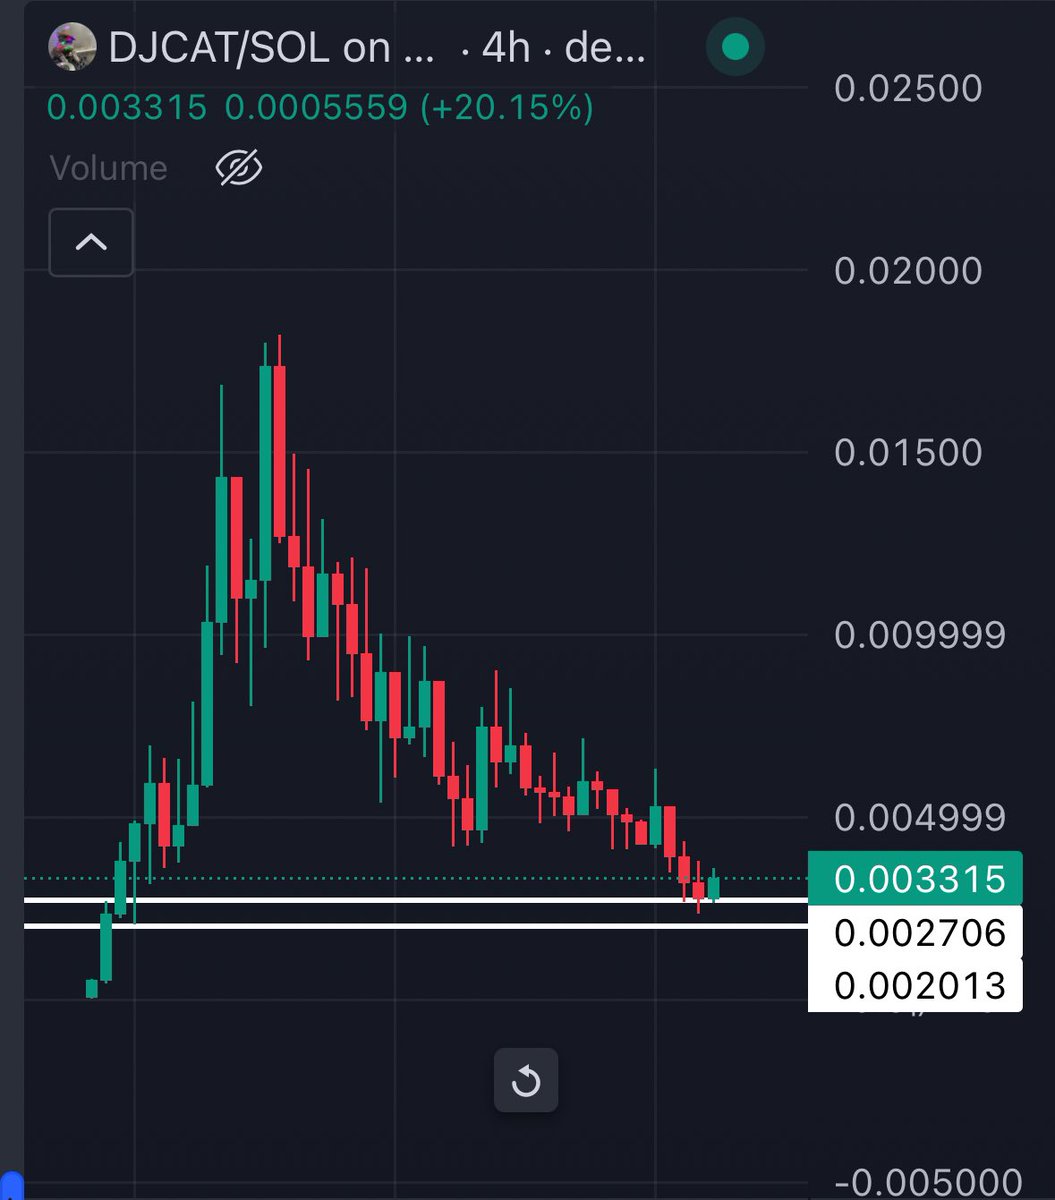 If you ever wanted to buy $djcat then this is the time cause R/R looks good and chart looks bottomed out. 

If this hold this support level then imo we will see legs up.